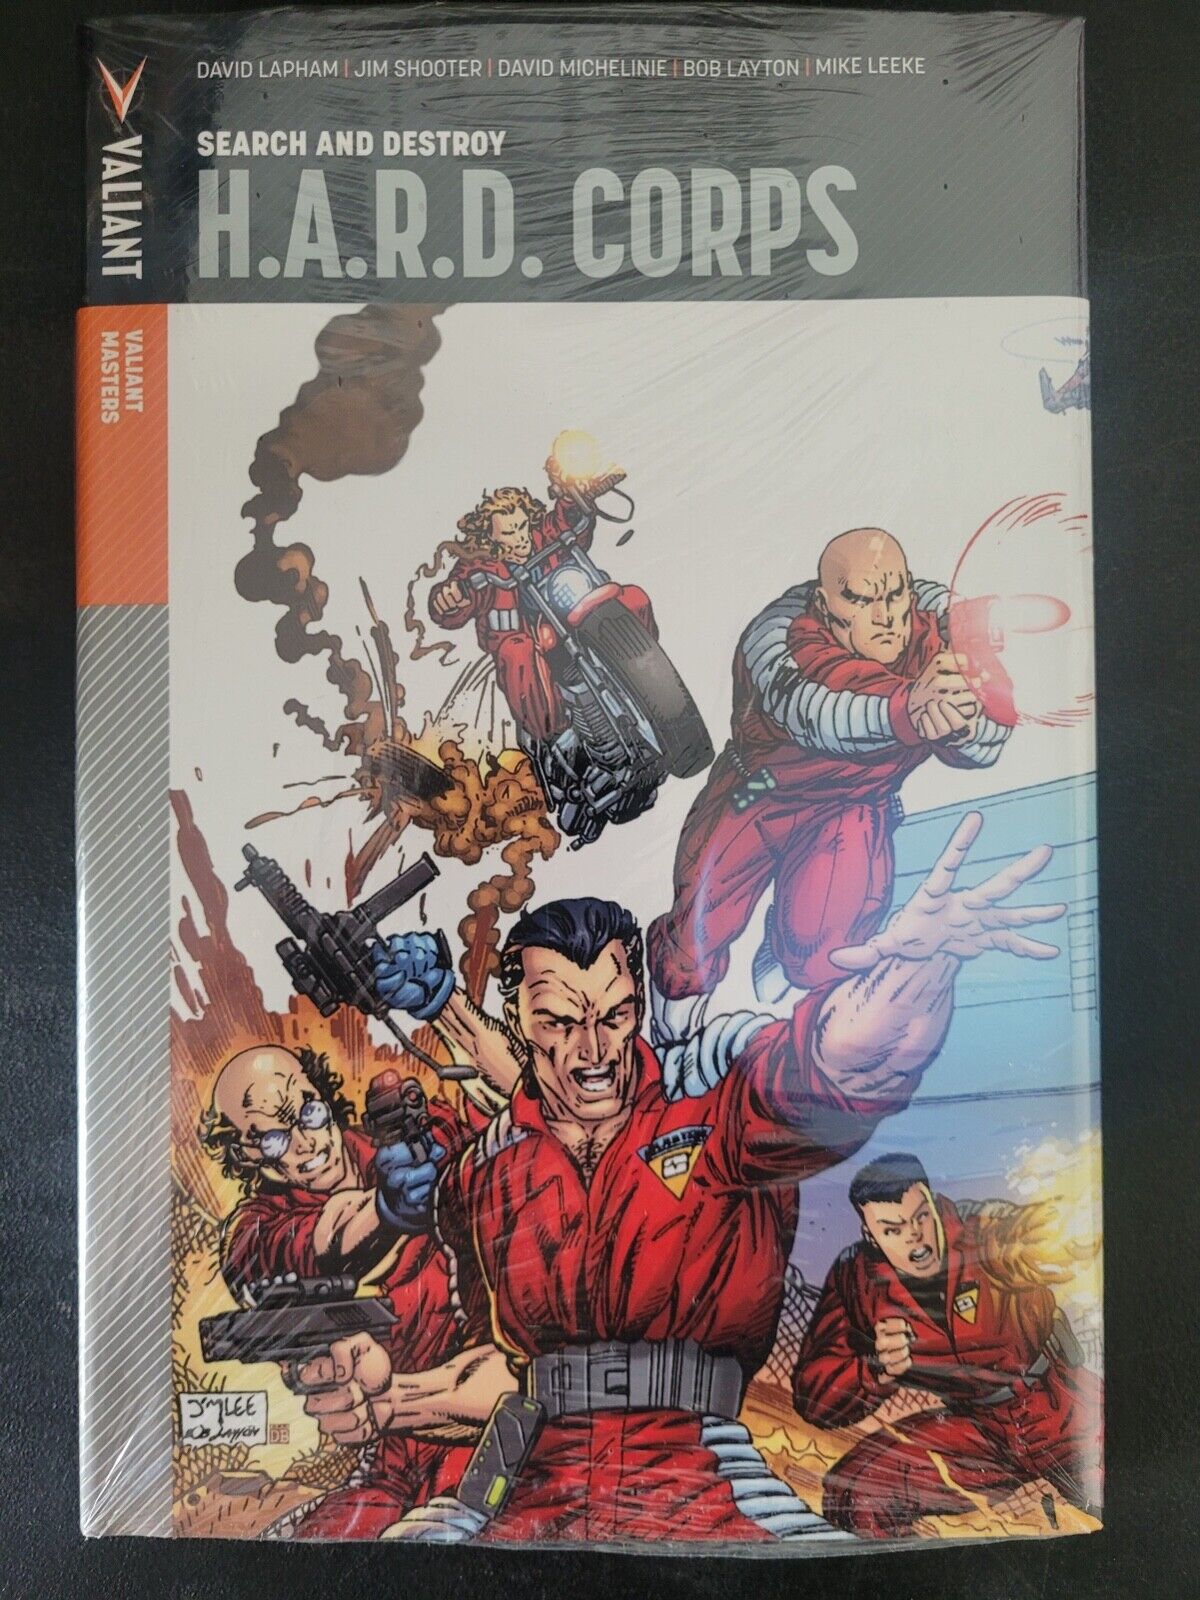 HARD CORPS Volume 1 SEARCH AND DESTROY HARDCOVER COLLECTION VALIANT NEW SEALED